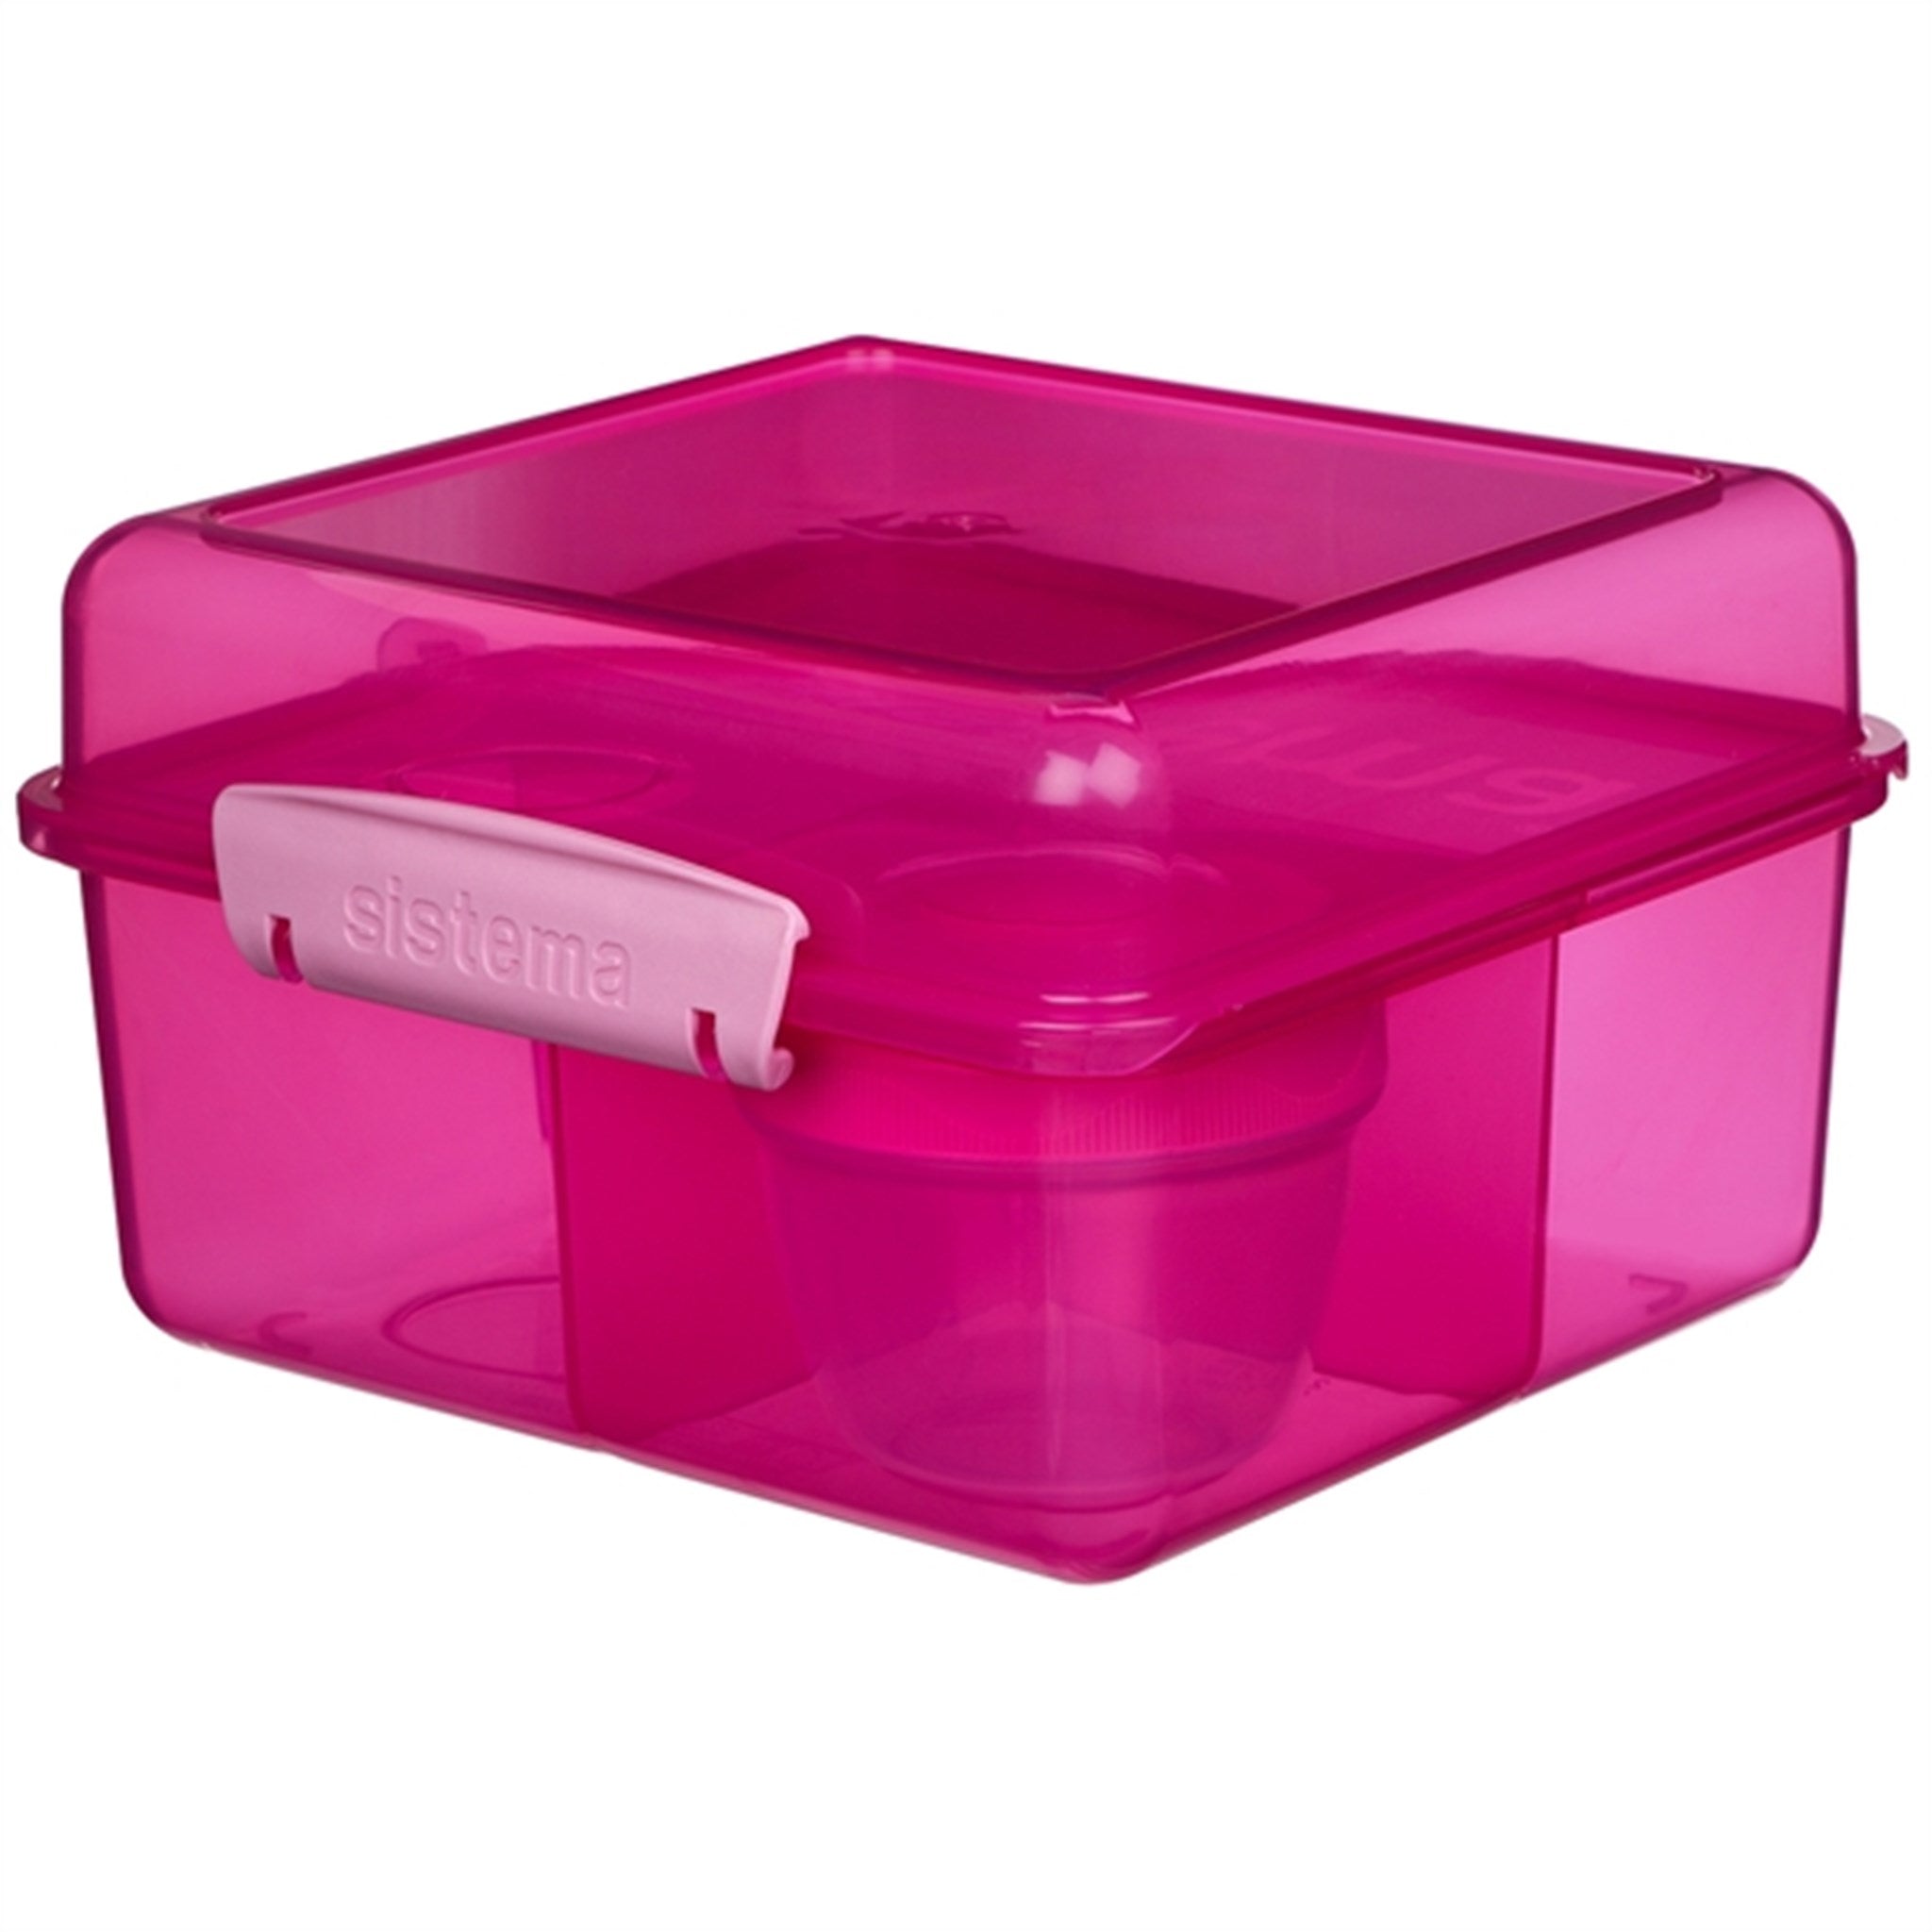 Sistema Lunch Cube Max Lunchlåda 2,0 L Pink